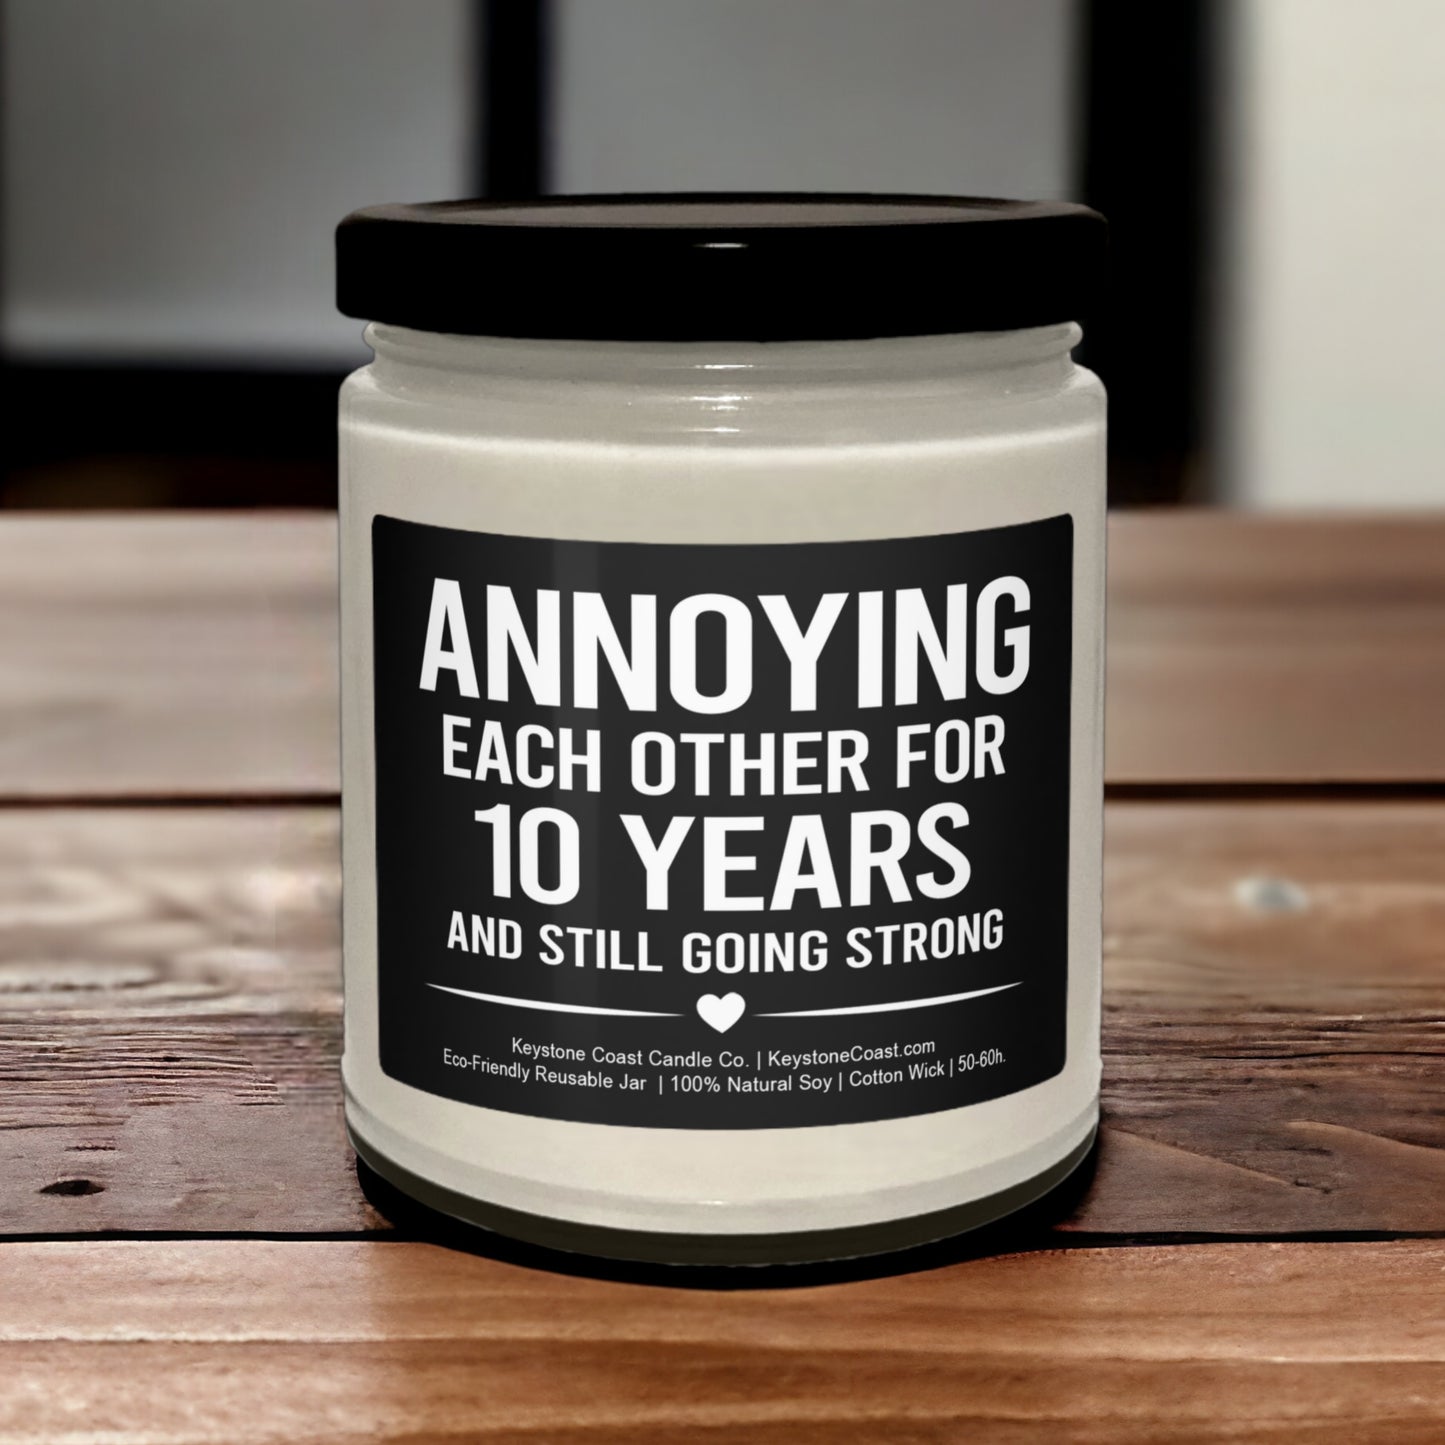 Annoying each other for 10 years Scented Soy Candle, 9oz